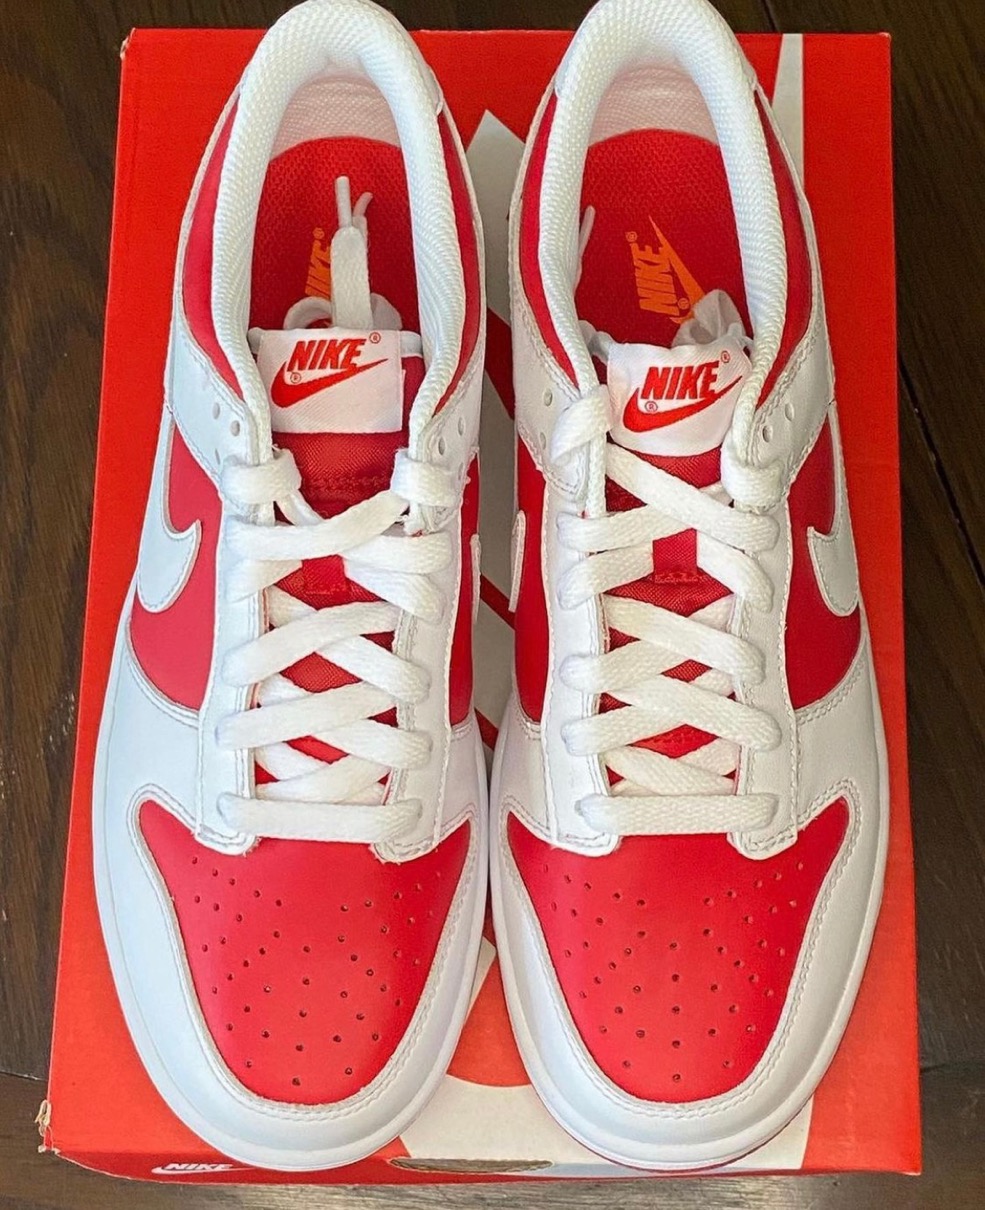 Nike】Dunk Low “Championship Red”が国内7月30日に発売予定 | UP TO DATE